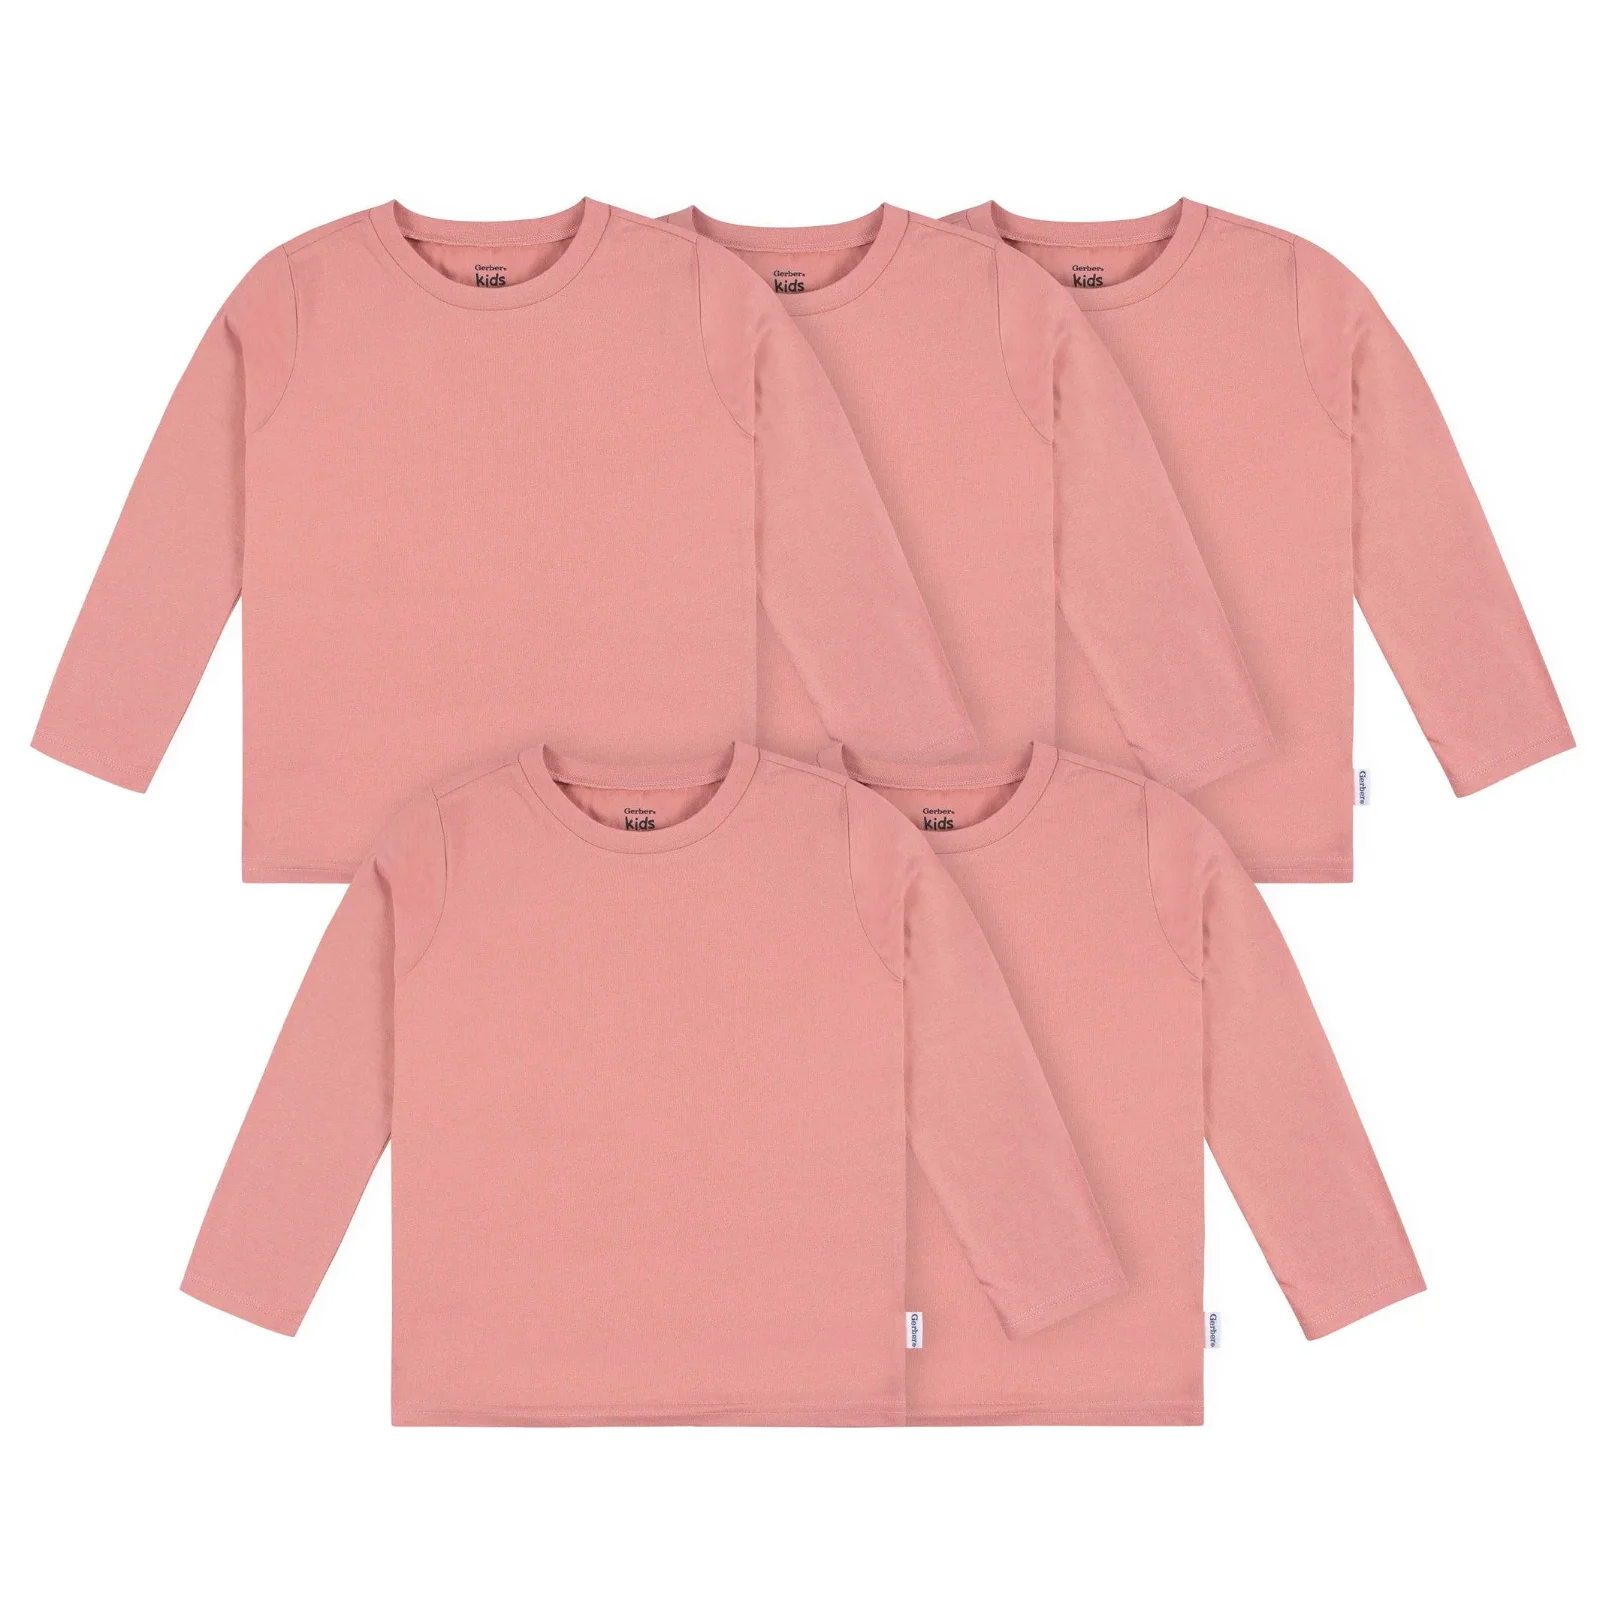 Image of 5-Pack Baby & Toddler Mauve Pink Premium Long Sleeve Tees